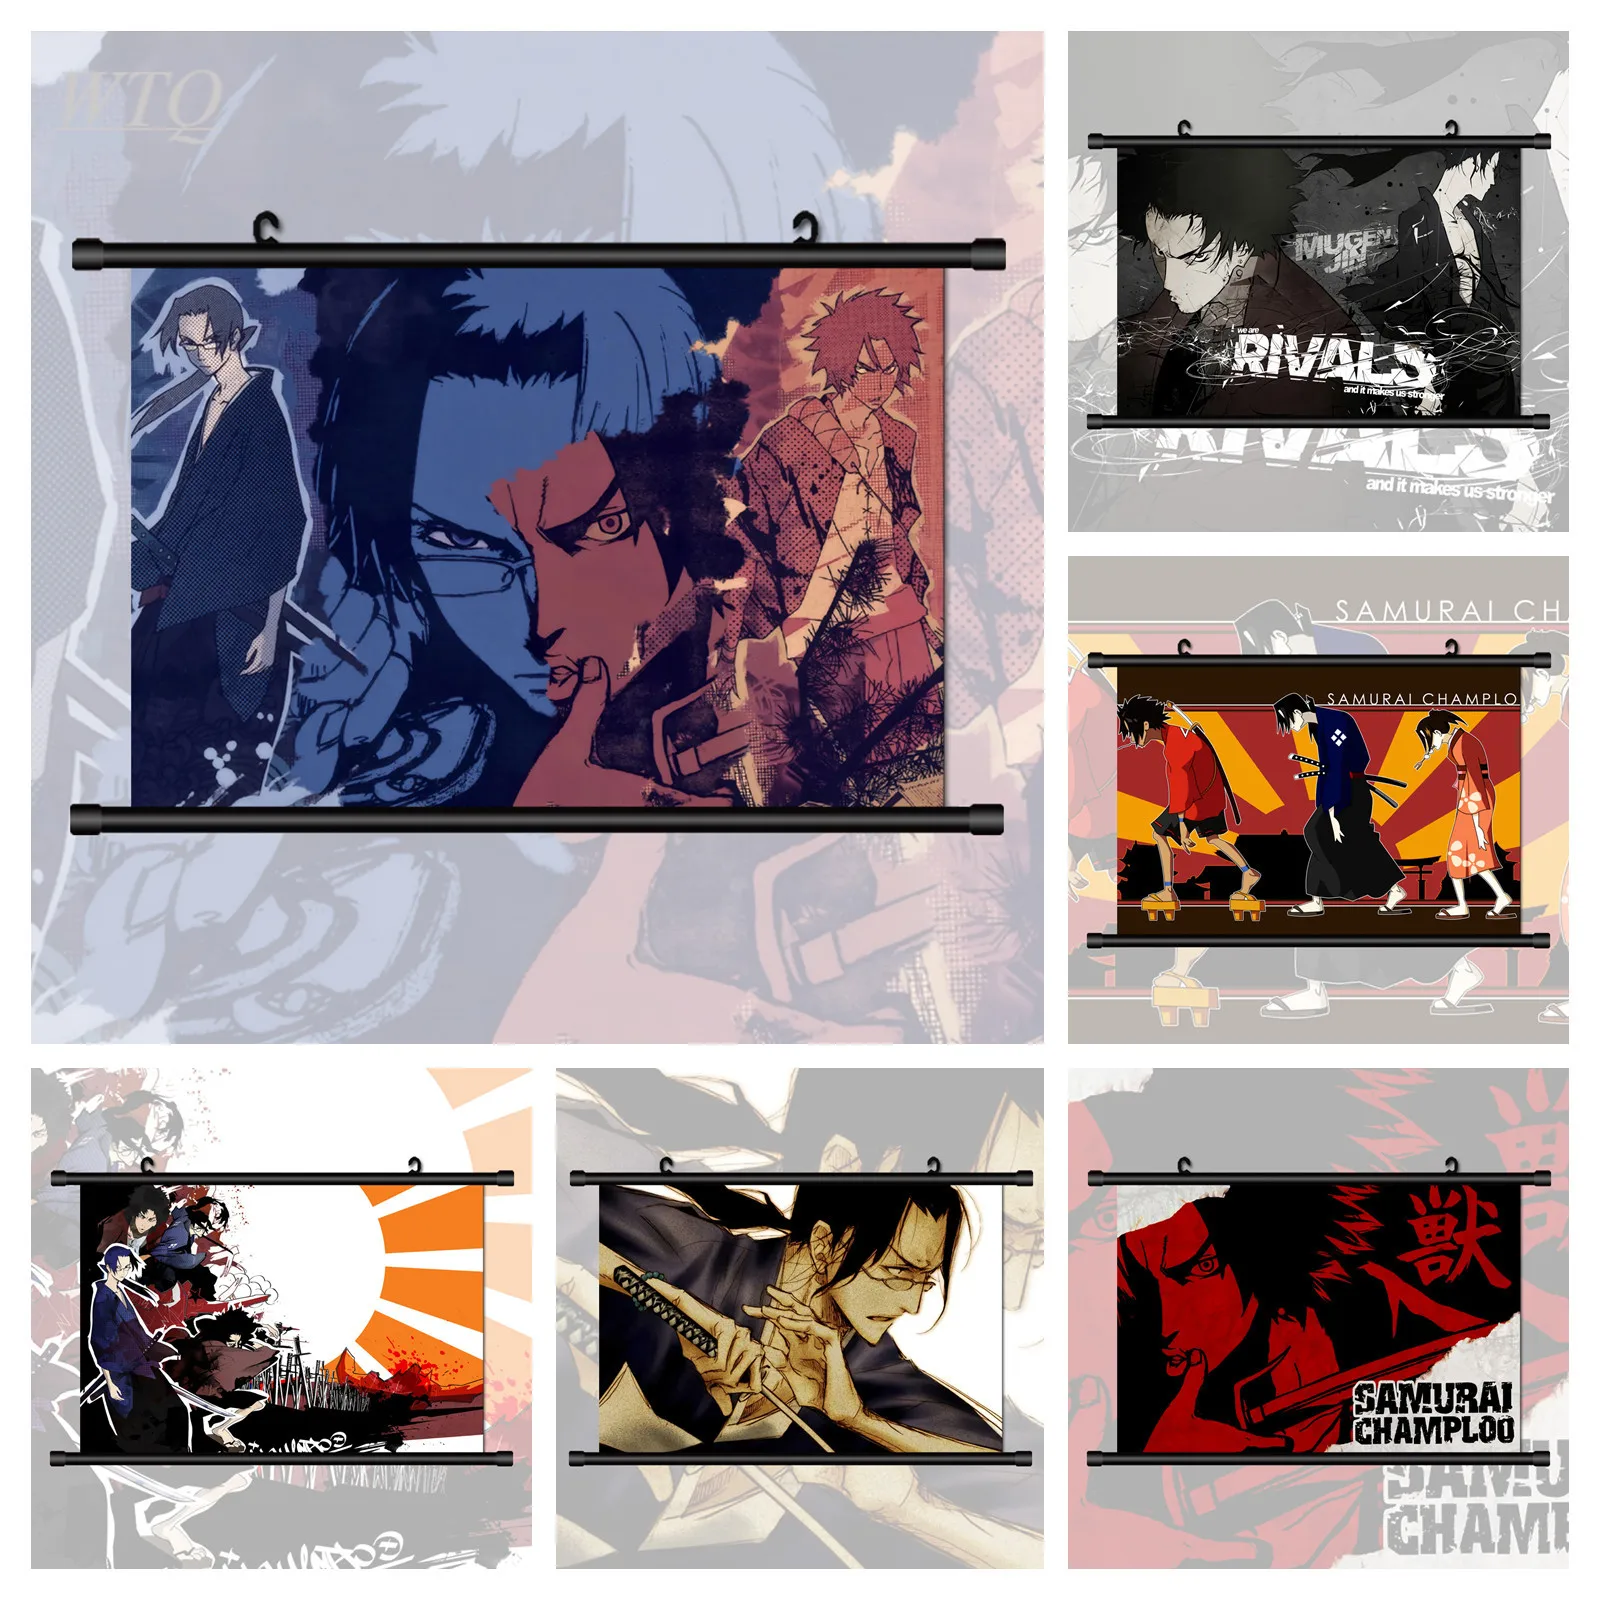 

Samurai Champloo Jin Mugen Kasumi Fuu Anime Posters Canvas Painting Wall Decor Posters Wall Poster Wall Art Picture Home Decor